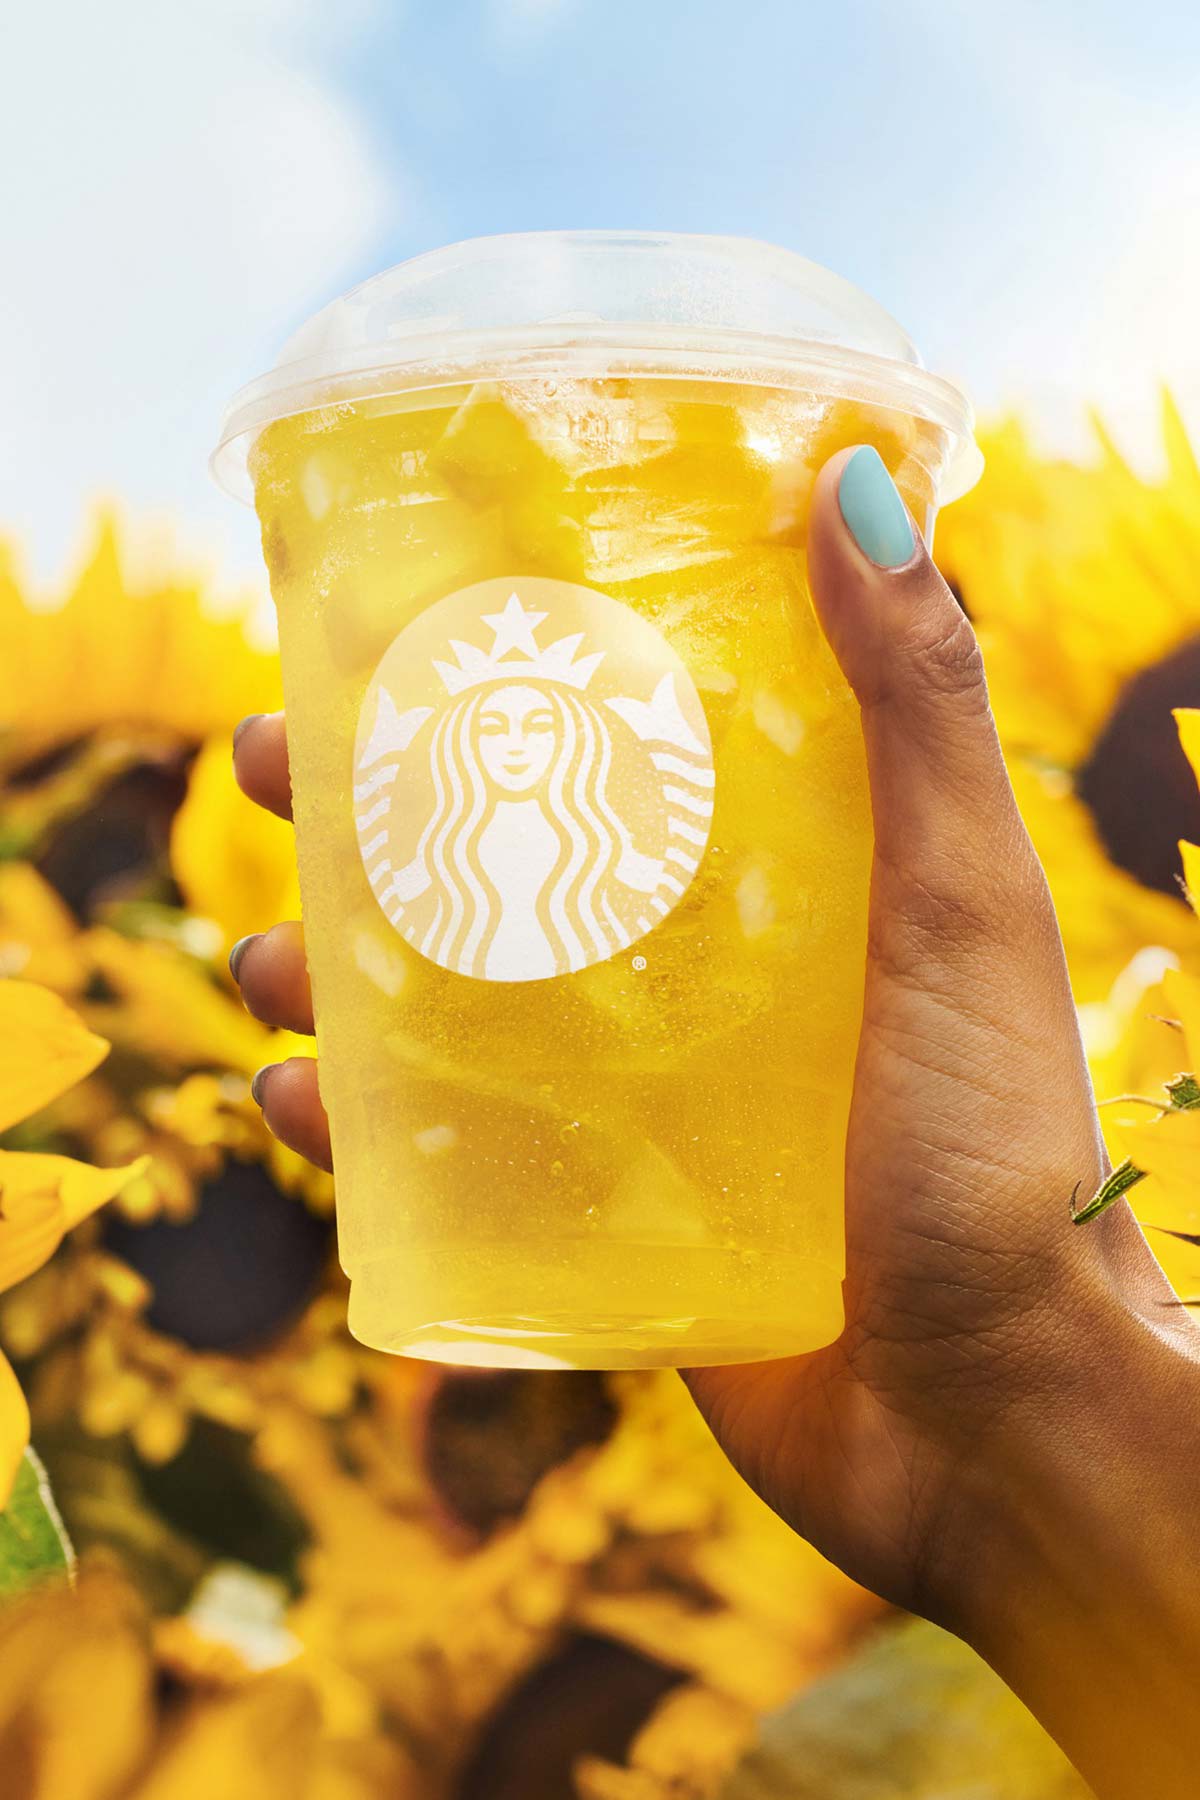 Iced yellow Starbucks drinks held up by hand in a field of sunflowers.